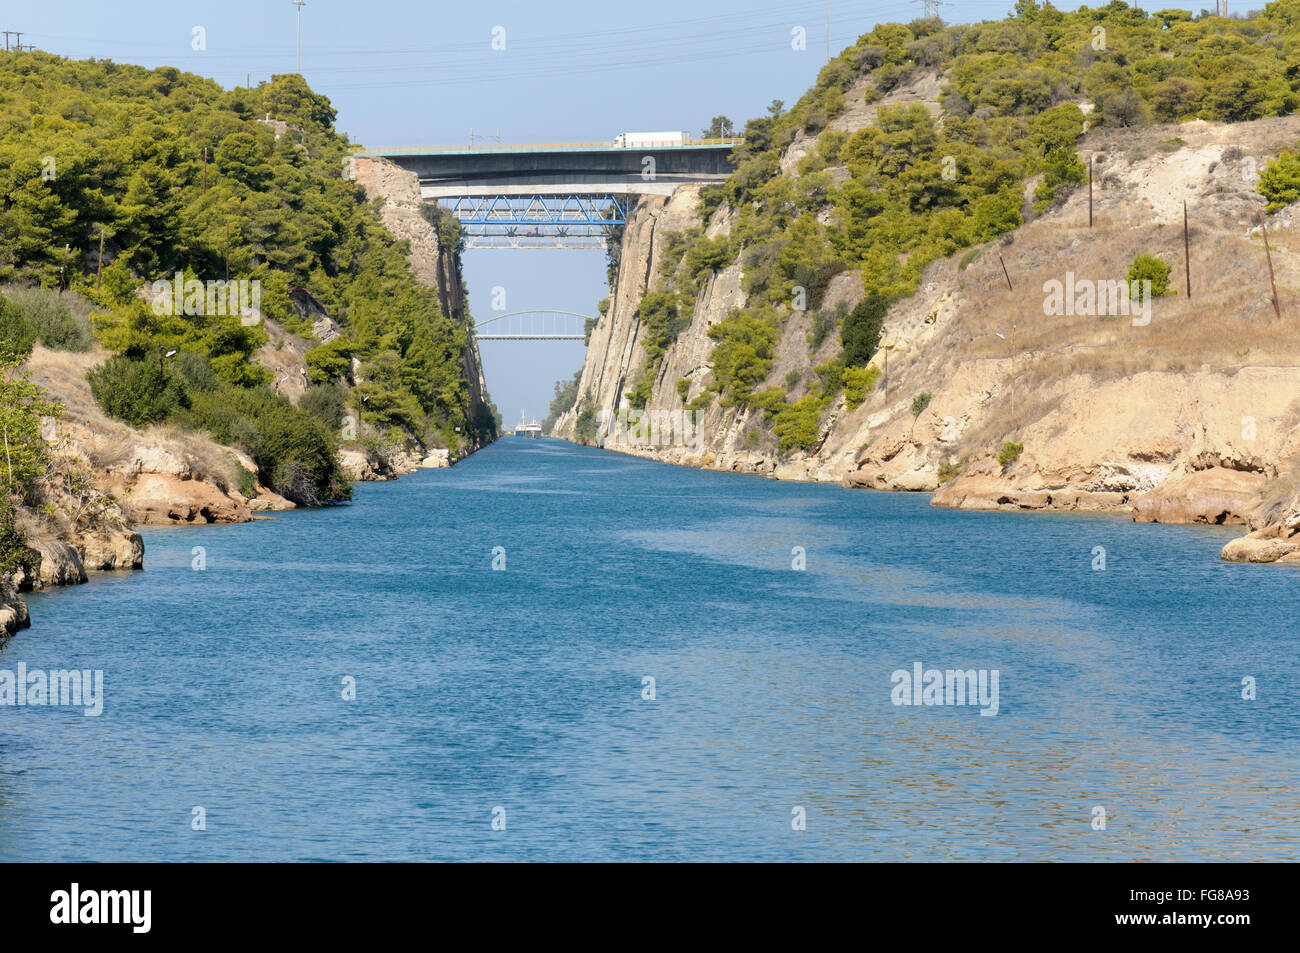 Boats passing through the Corinth canal which cuts through the isthmus separating the Peloponnese from Greece Stock Photo